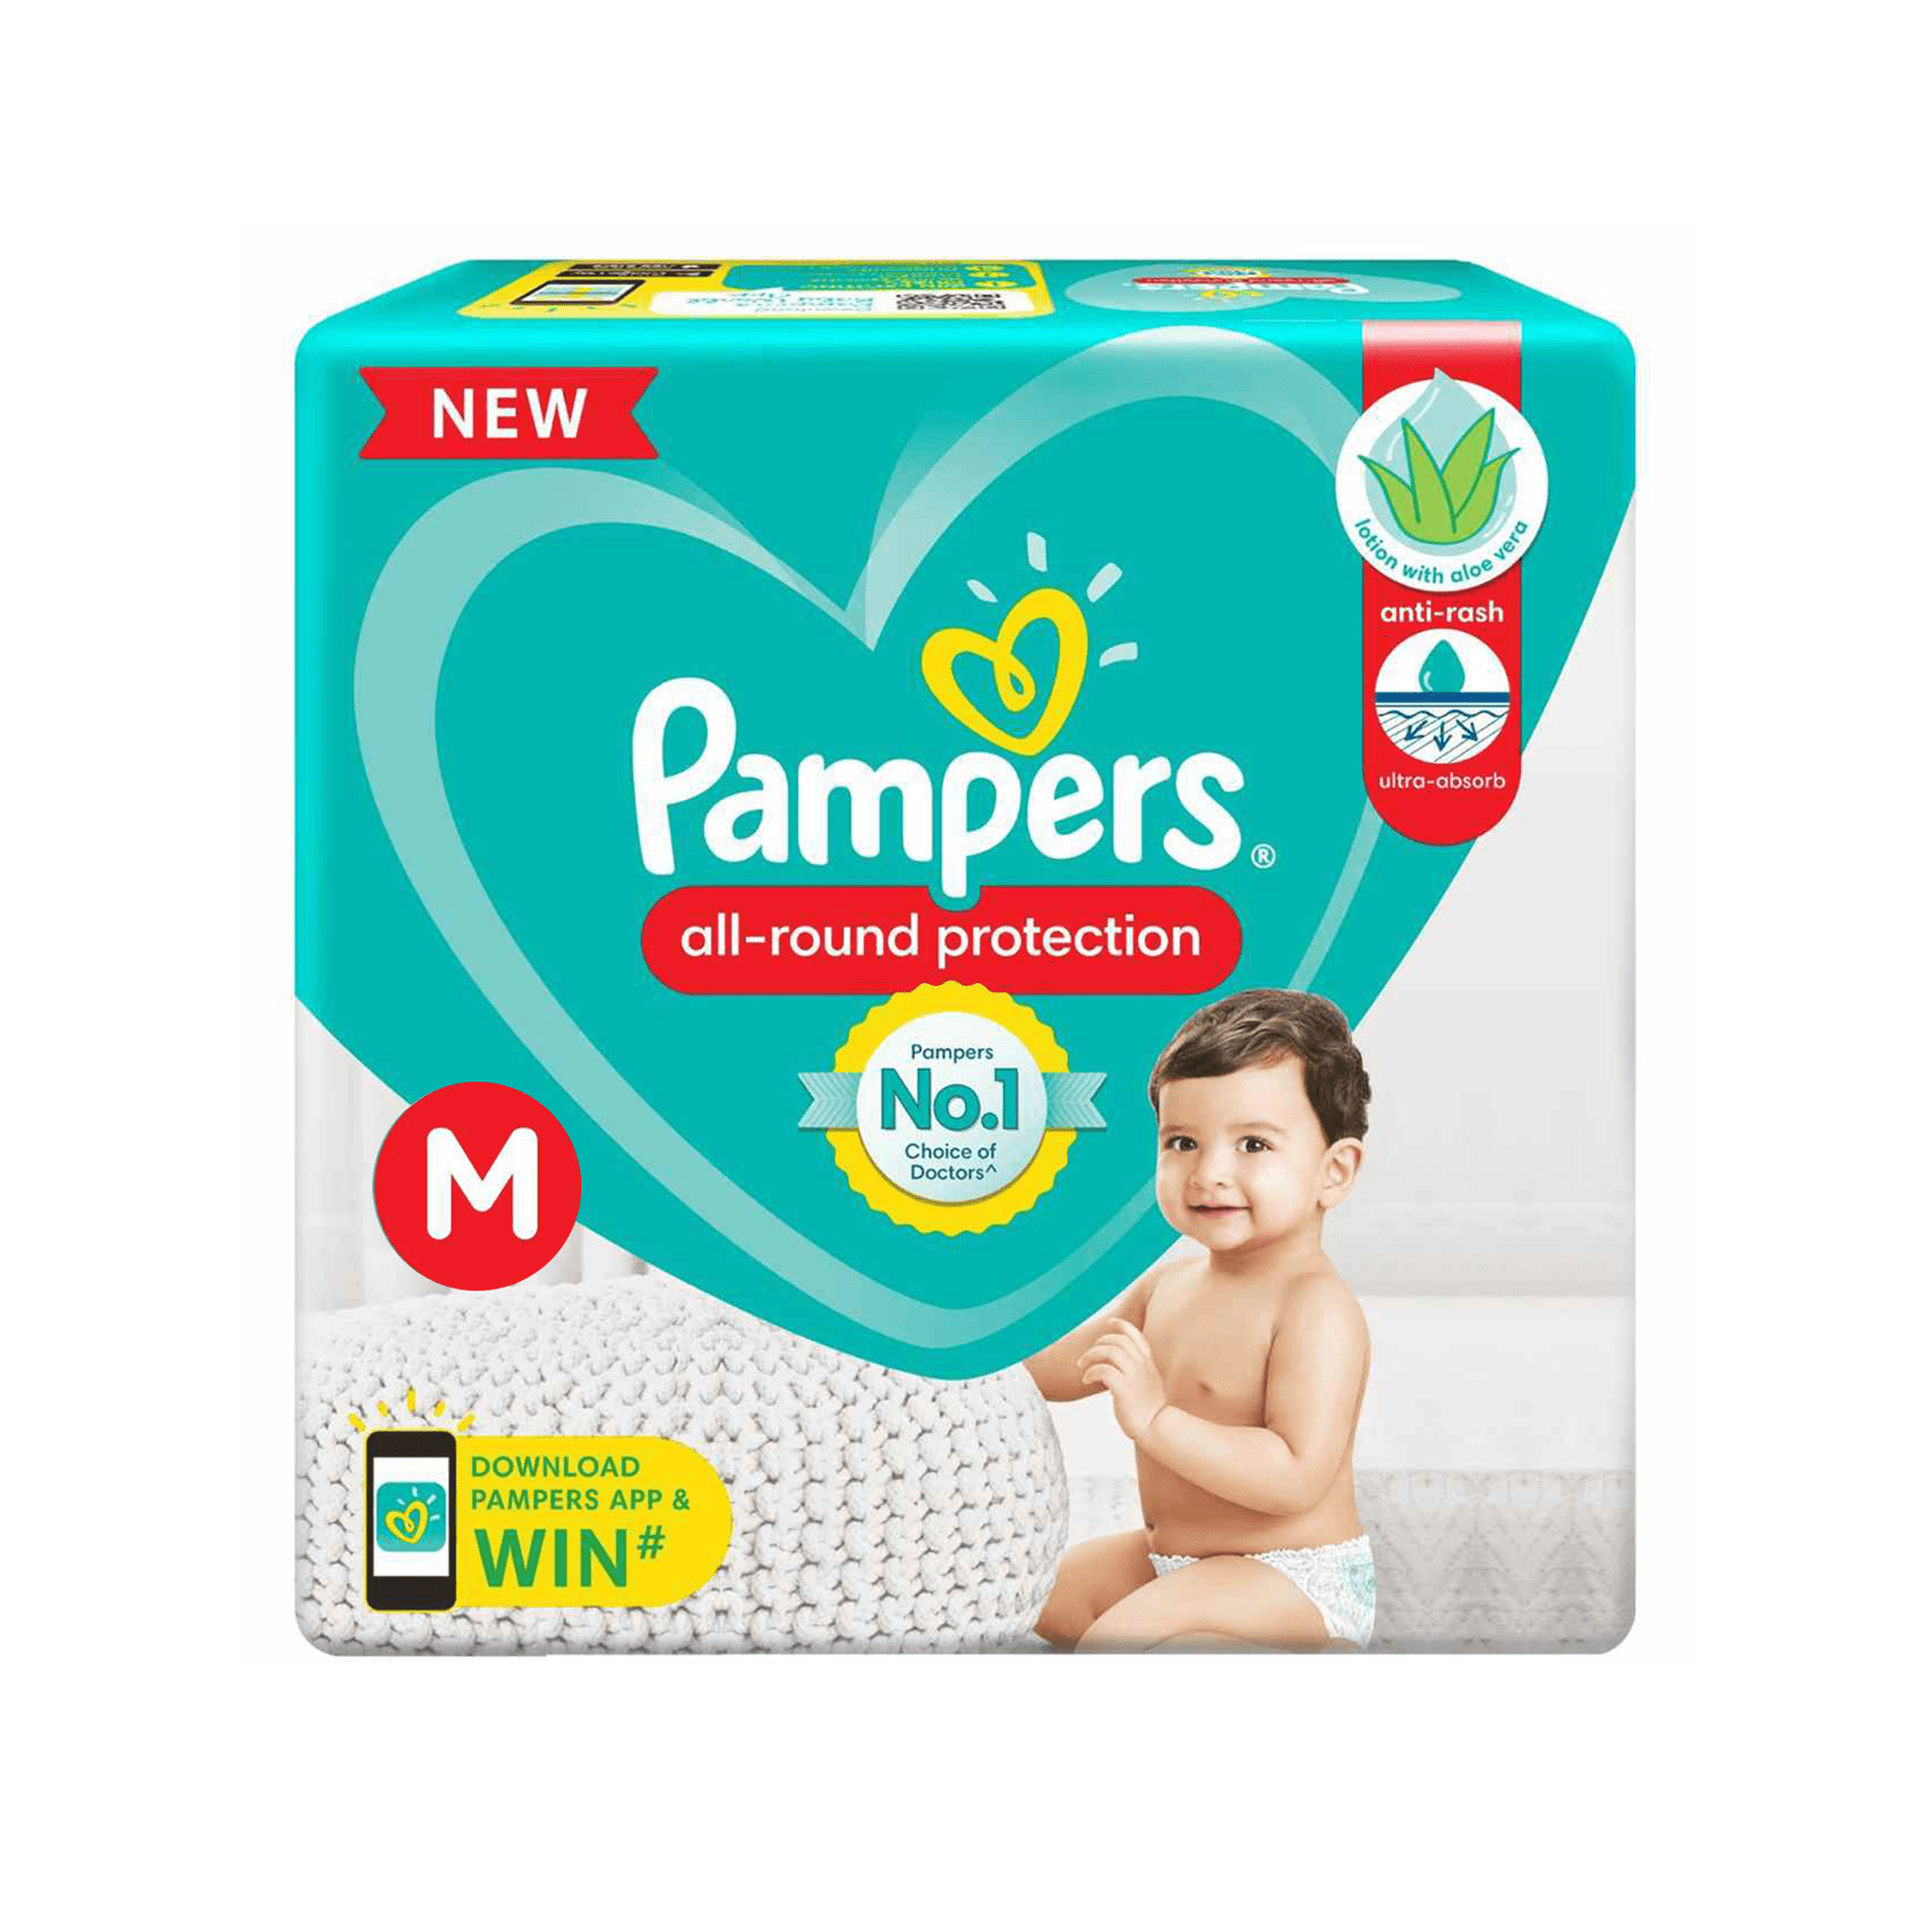 Buy Bumtum Baby Diaper Pants, Medium Size, 66 Count, Double Layer Leakage  Protection Infused With Aloe Vera, Cottony Soft High Absorb Technology  (Pack of 1) Online at Low Prices in India - Amazon.in